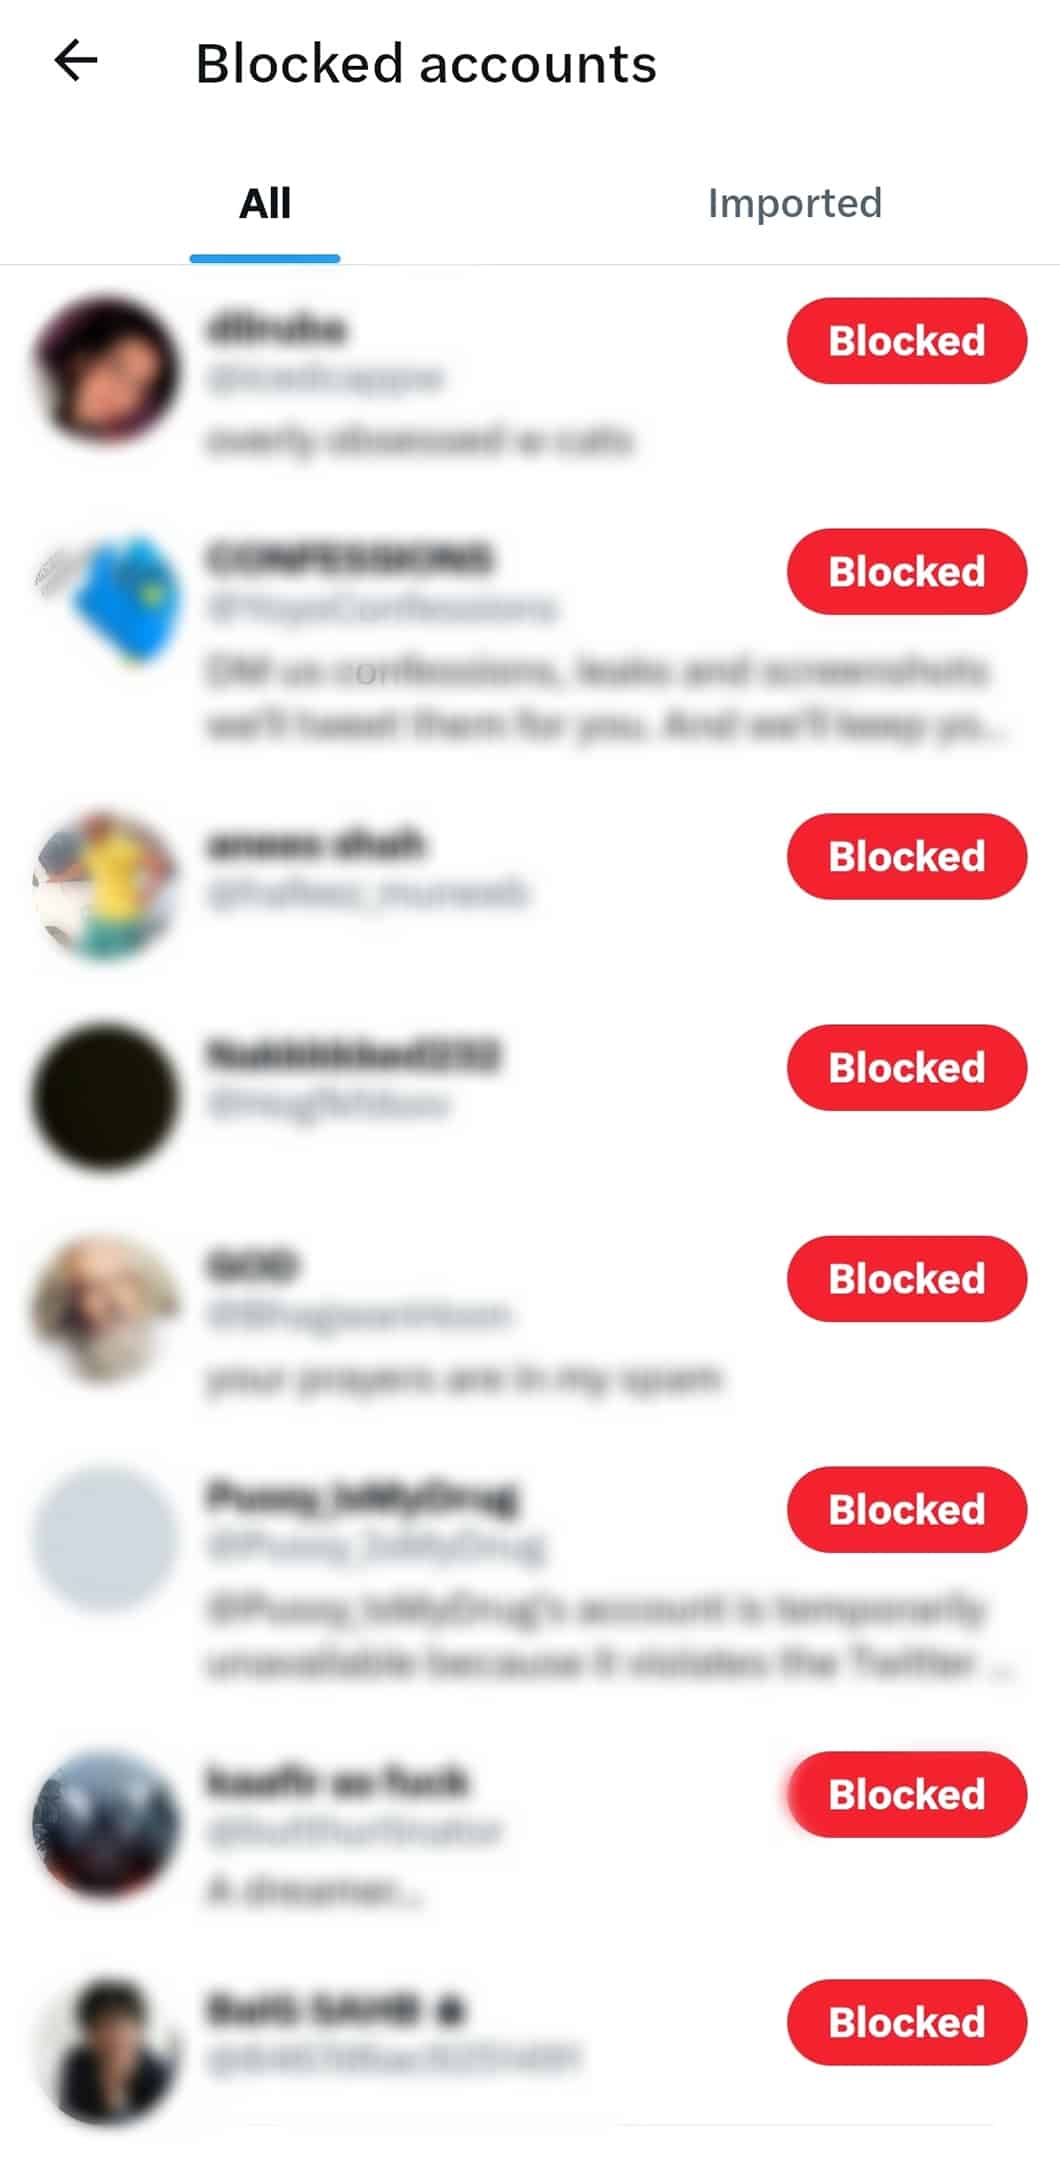 All The Accounts You've Blocked Will Display